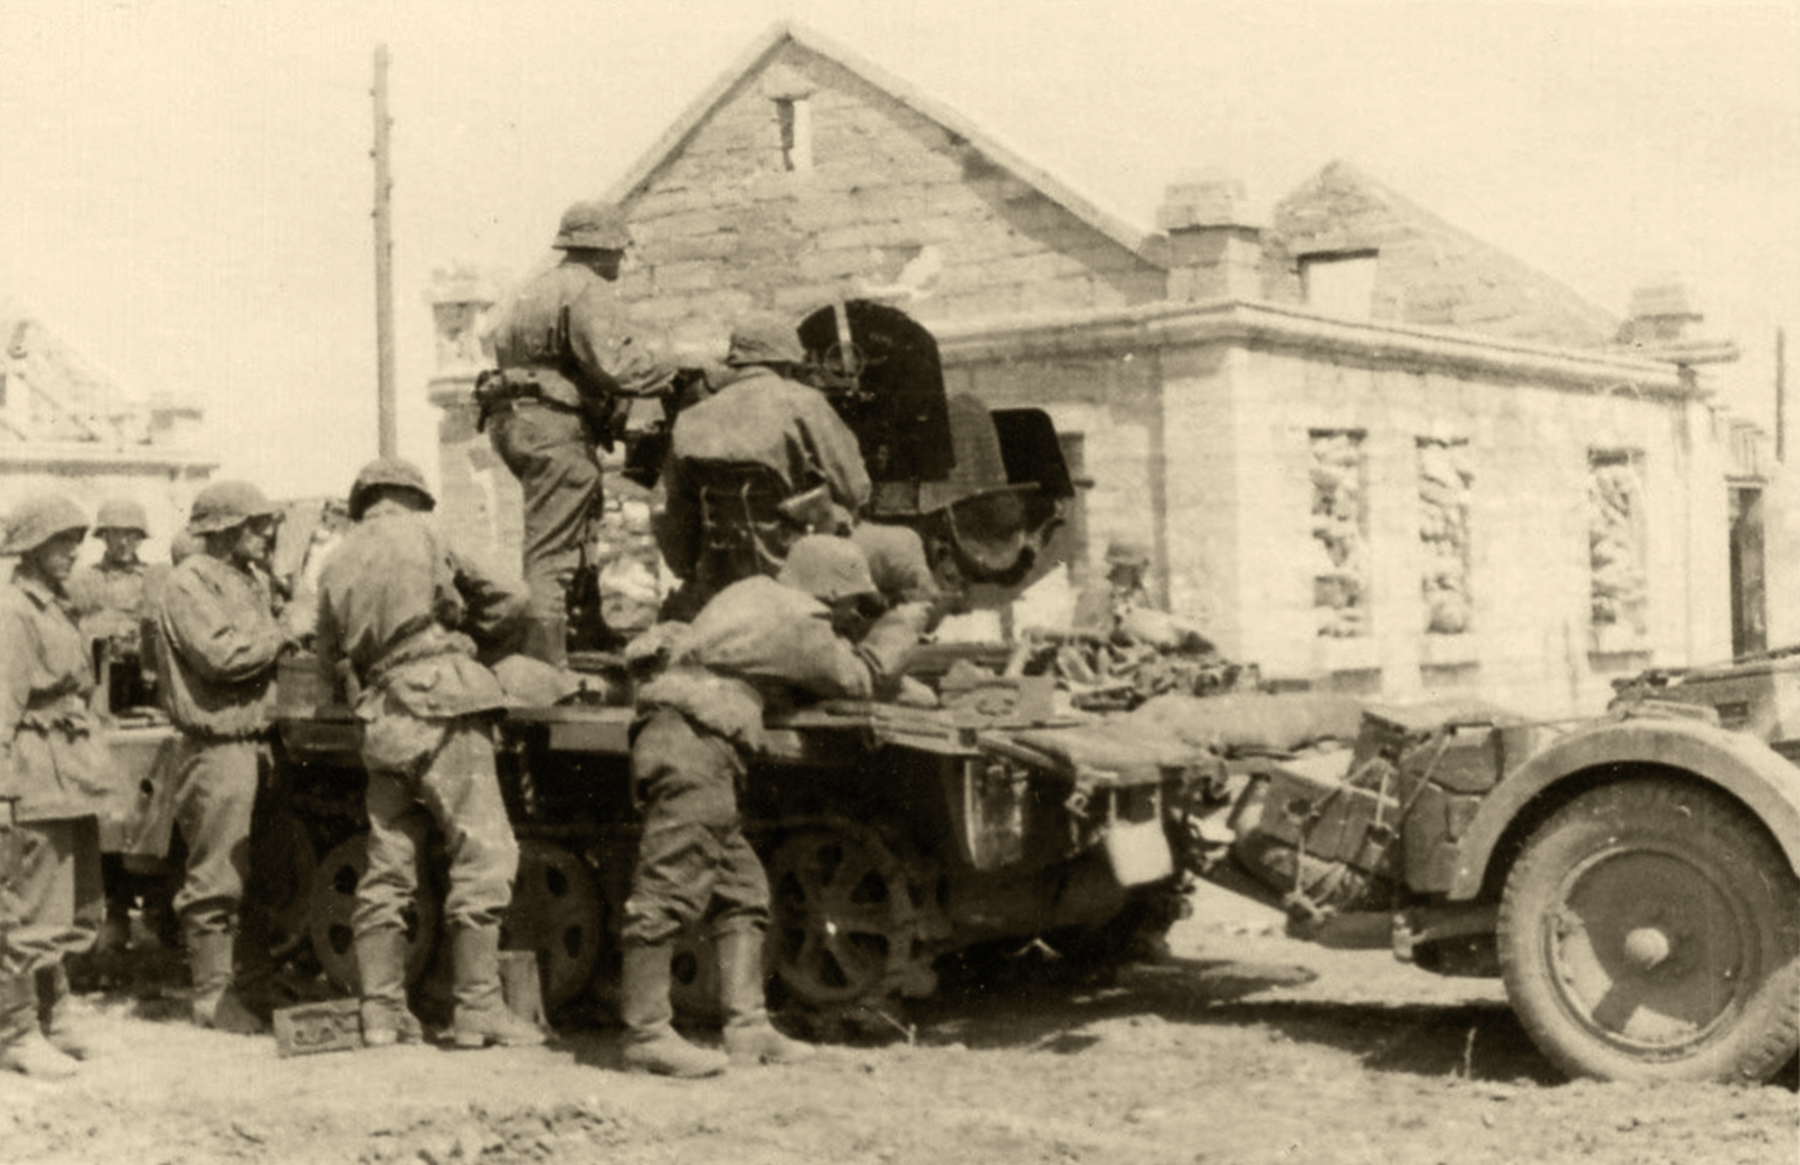 11th Army 22 Infanterie Division Fla Bataillon 22 (mot) during the attack on Sevastopol 1942 01